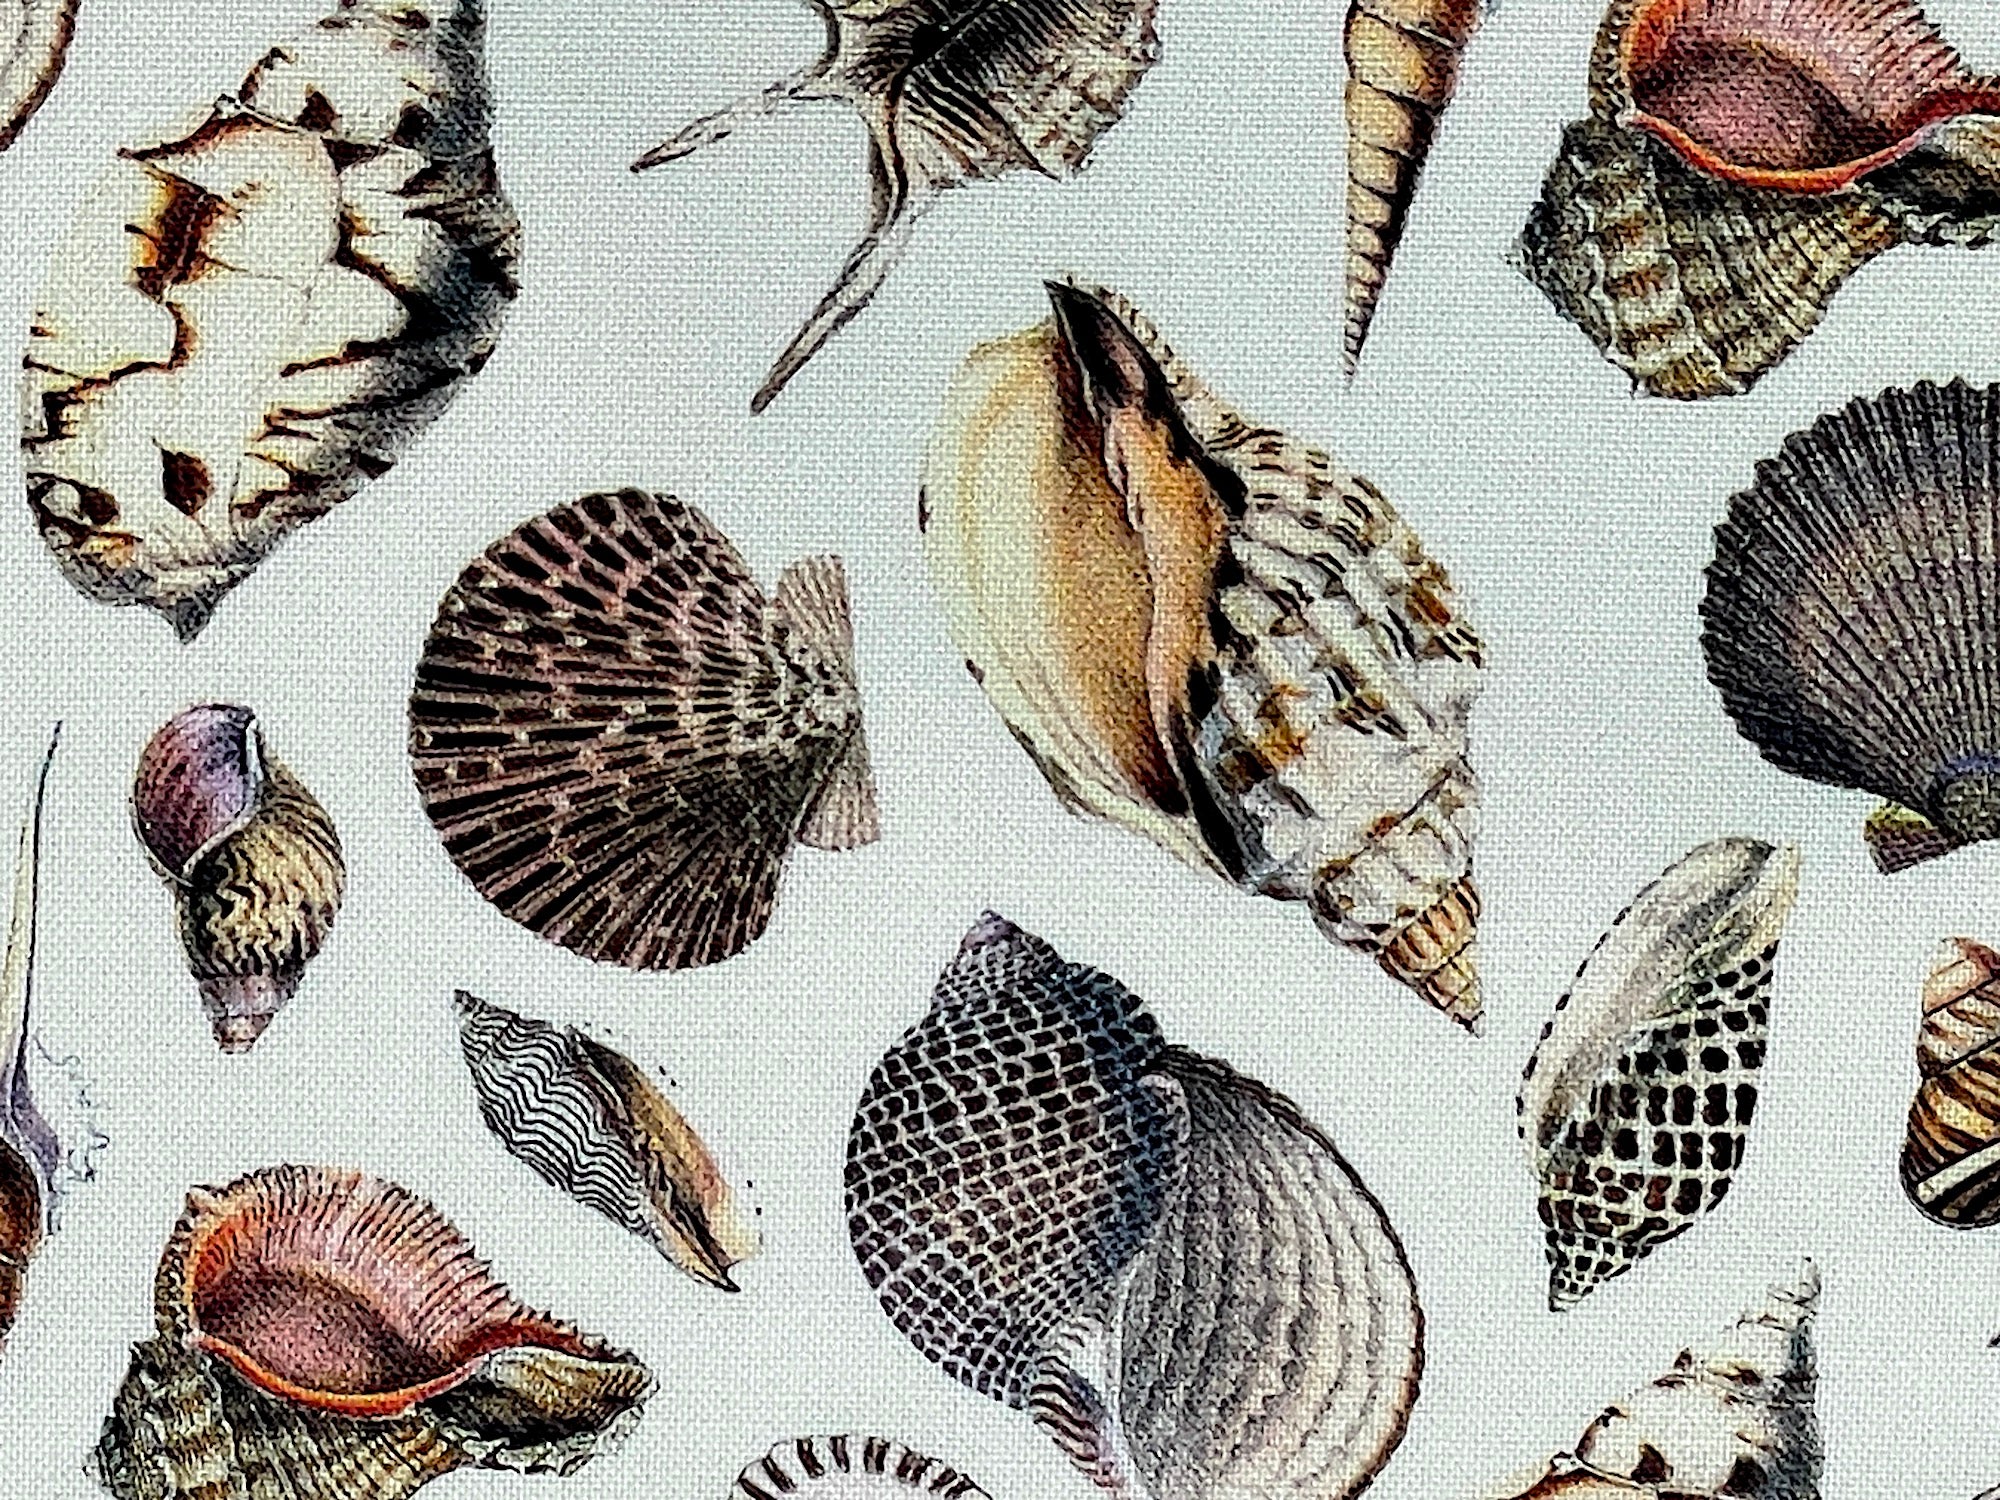 Close up of seashells in shades of cream, brown, beige.